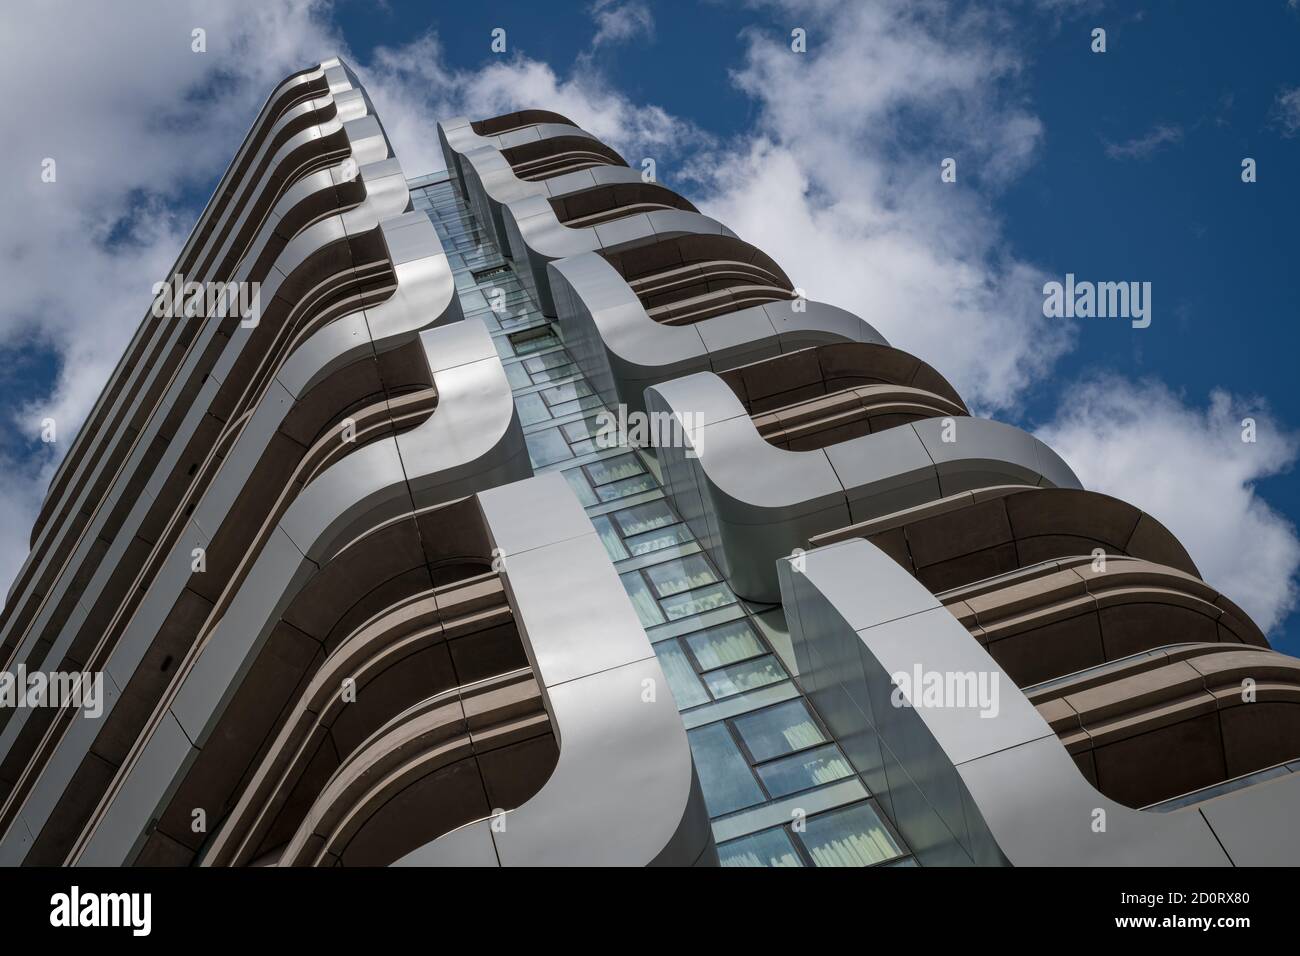 Canaletto Tower luxury residential tower located between Islington and Shoreditch, London, United Kingdom Stock Photo